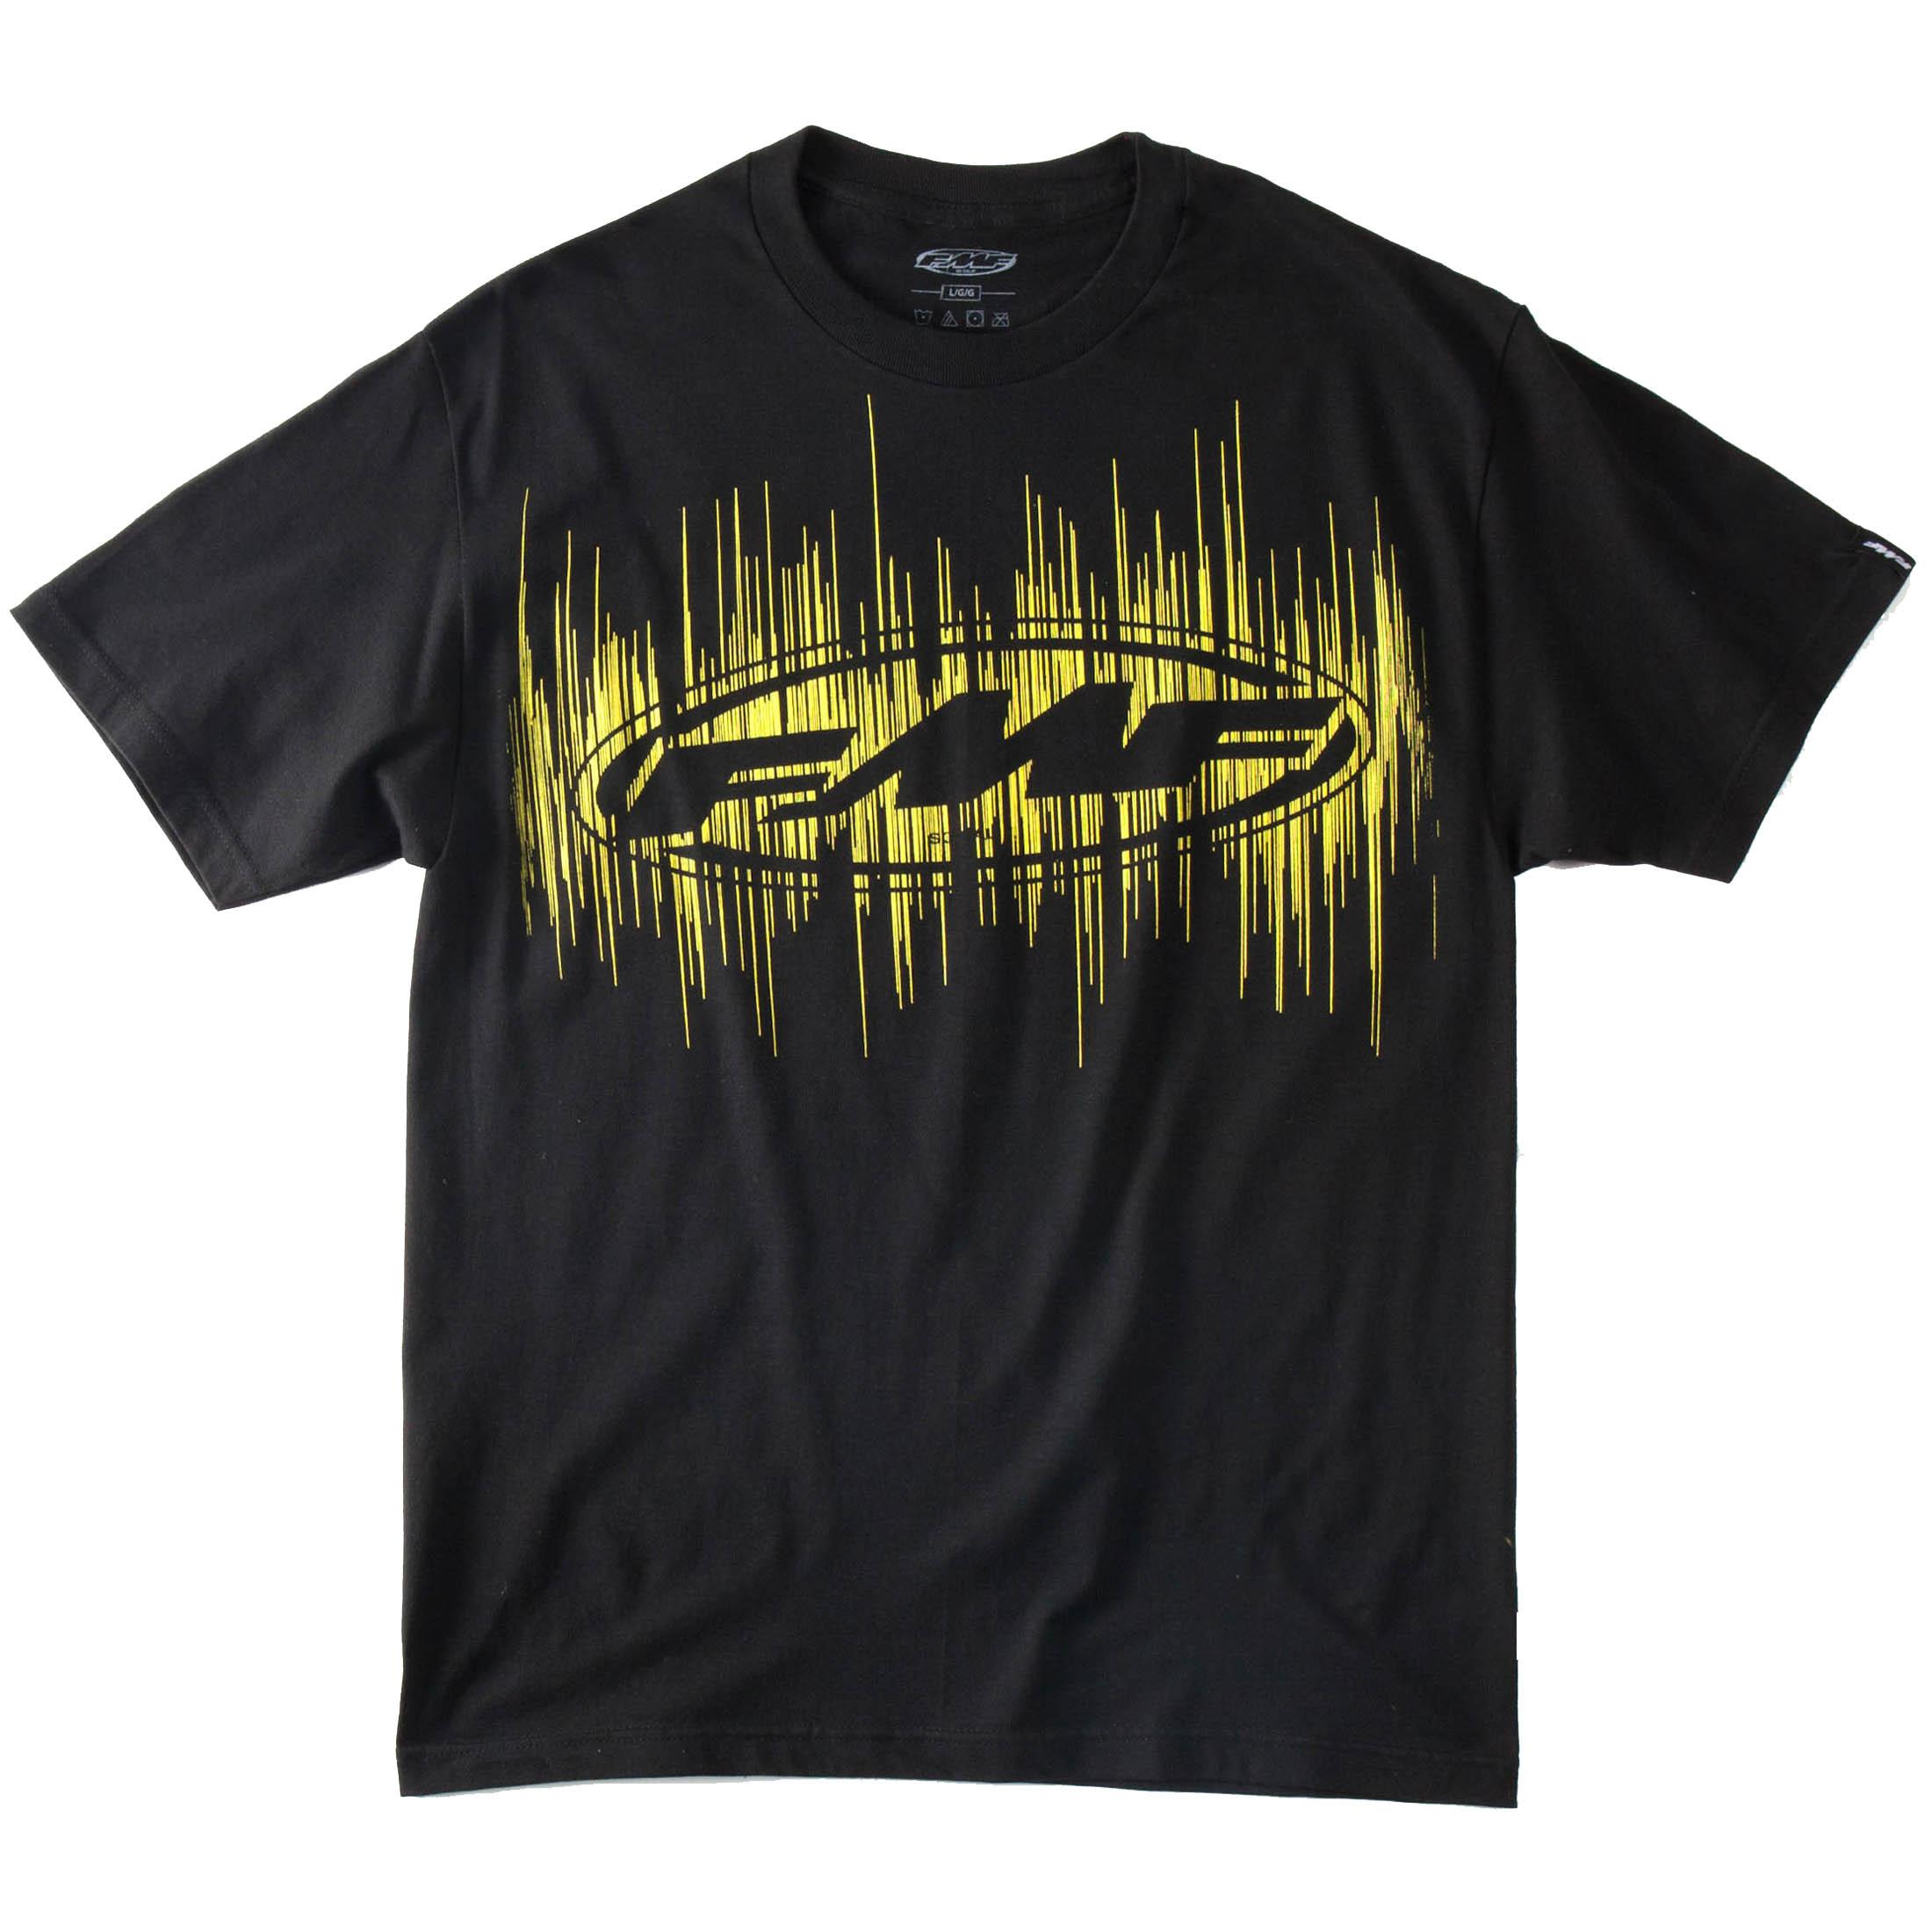 Fmf apparel frequency t-shirt motorcycle shirts